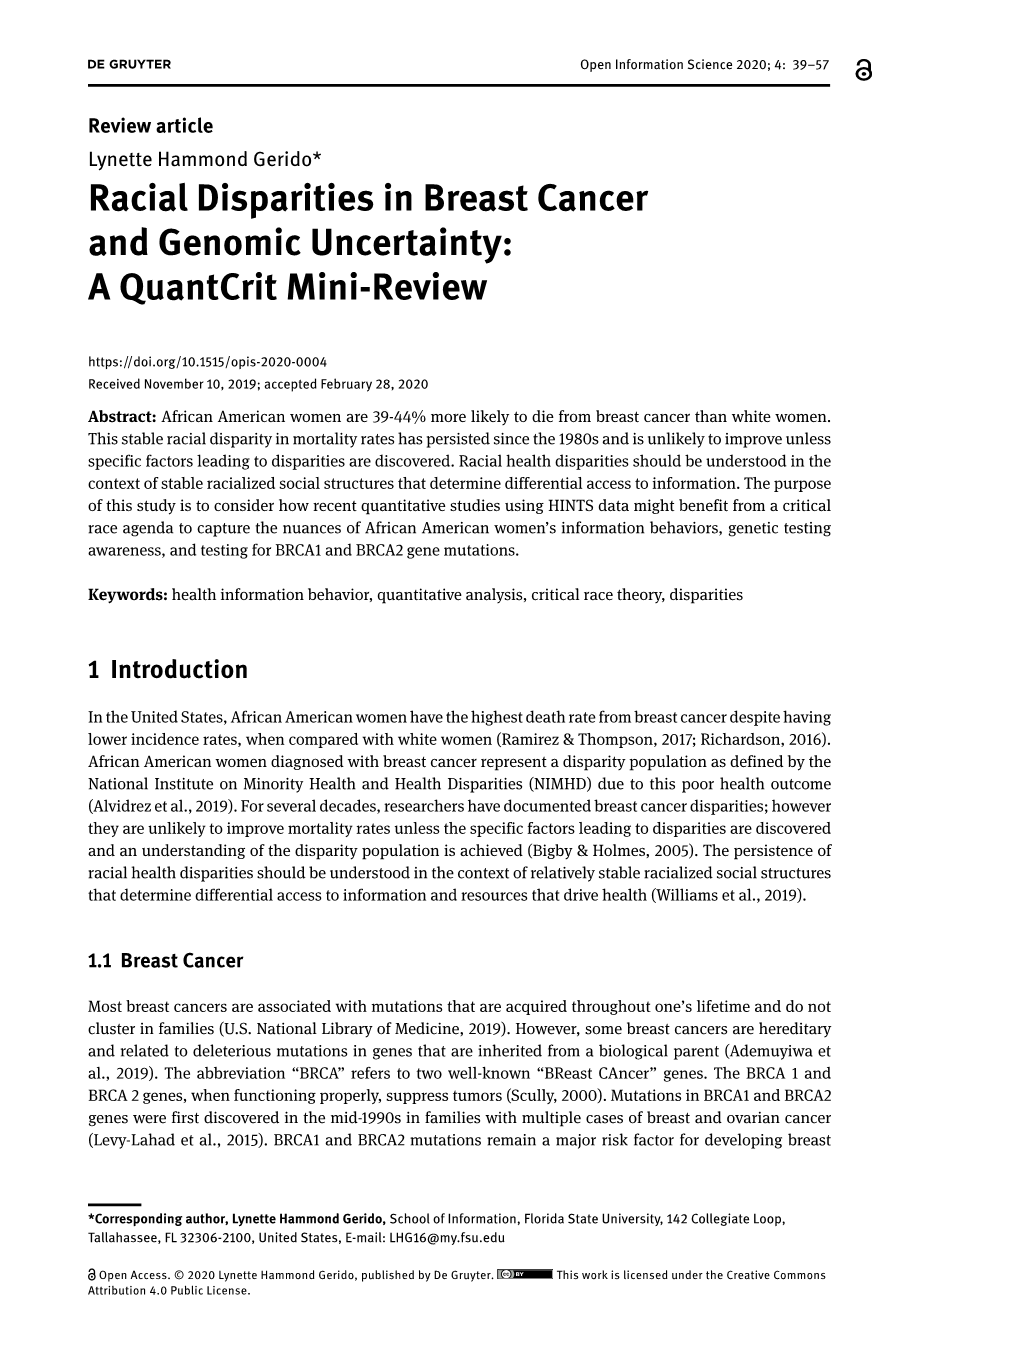 Racial Disparities in Breast Cancer and Genomic Uncertainty: a Quantcrit Mini-Review